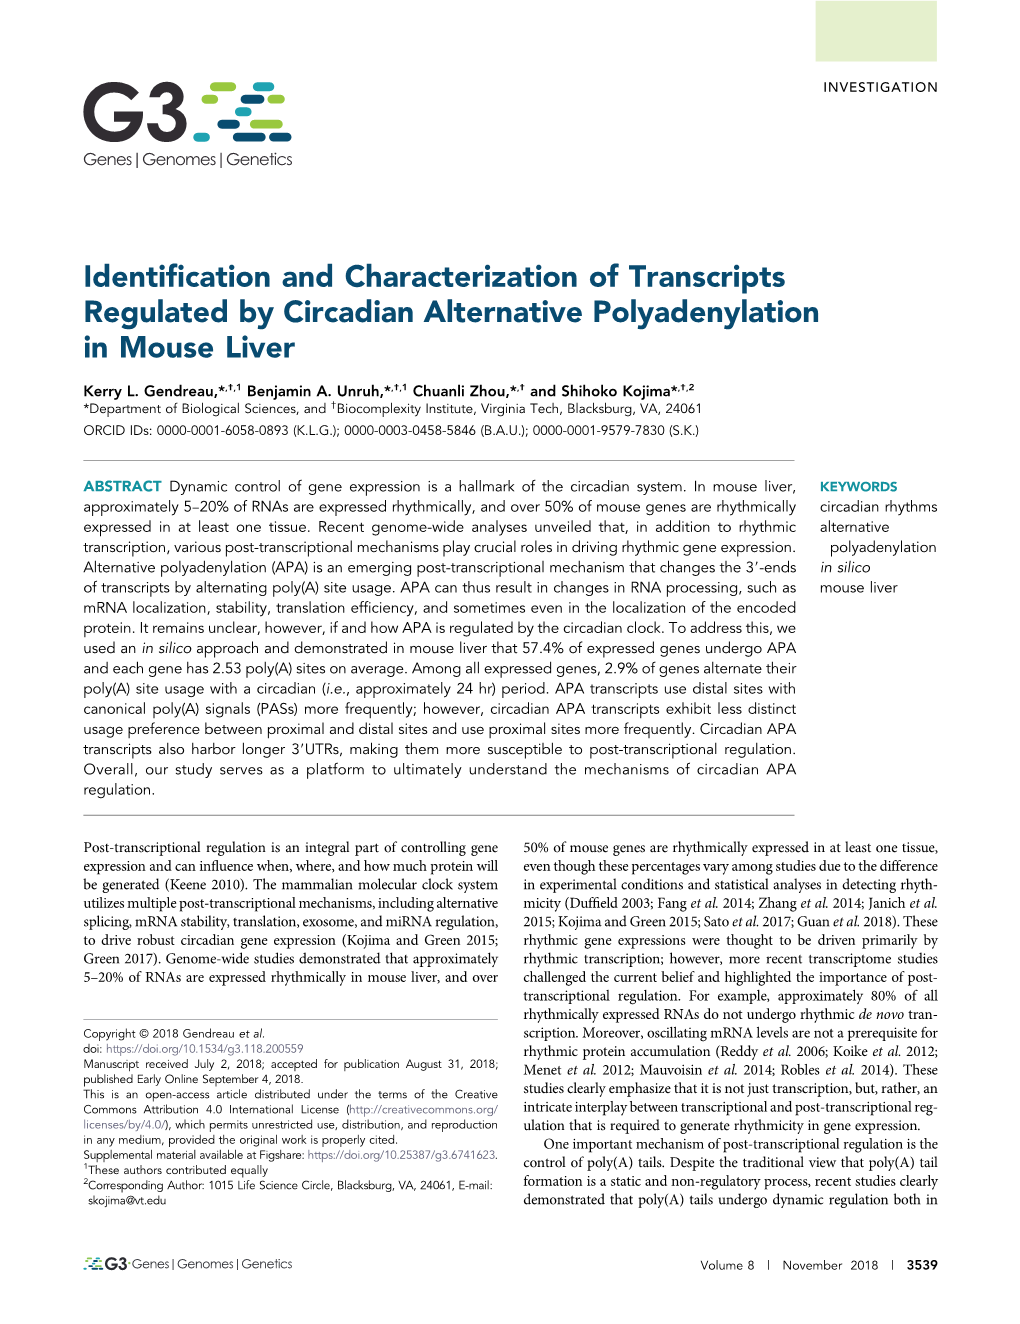 Identification and Characterization of Transcripts Regulated by Circadian